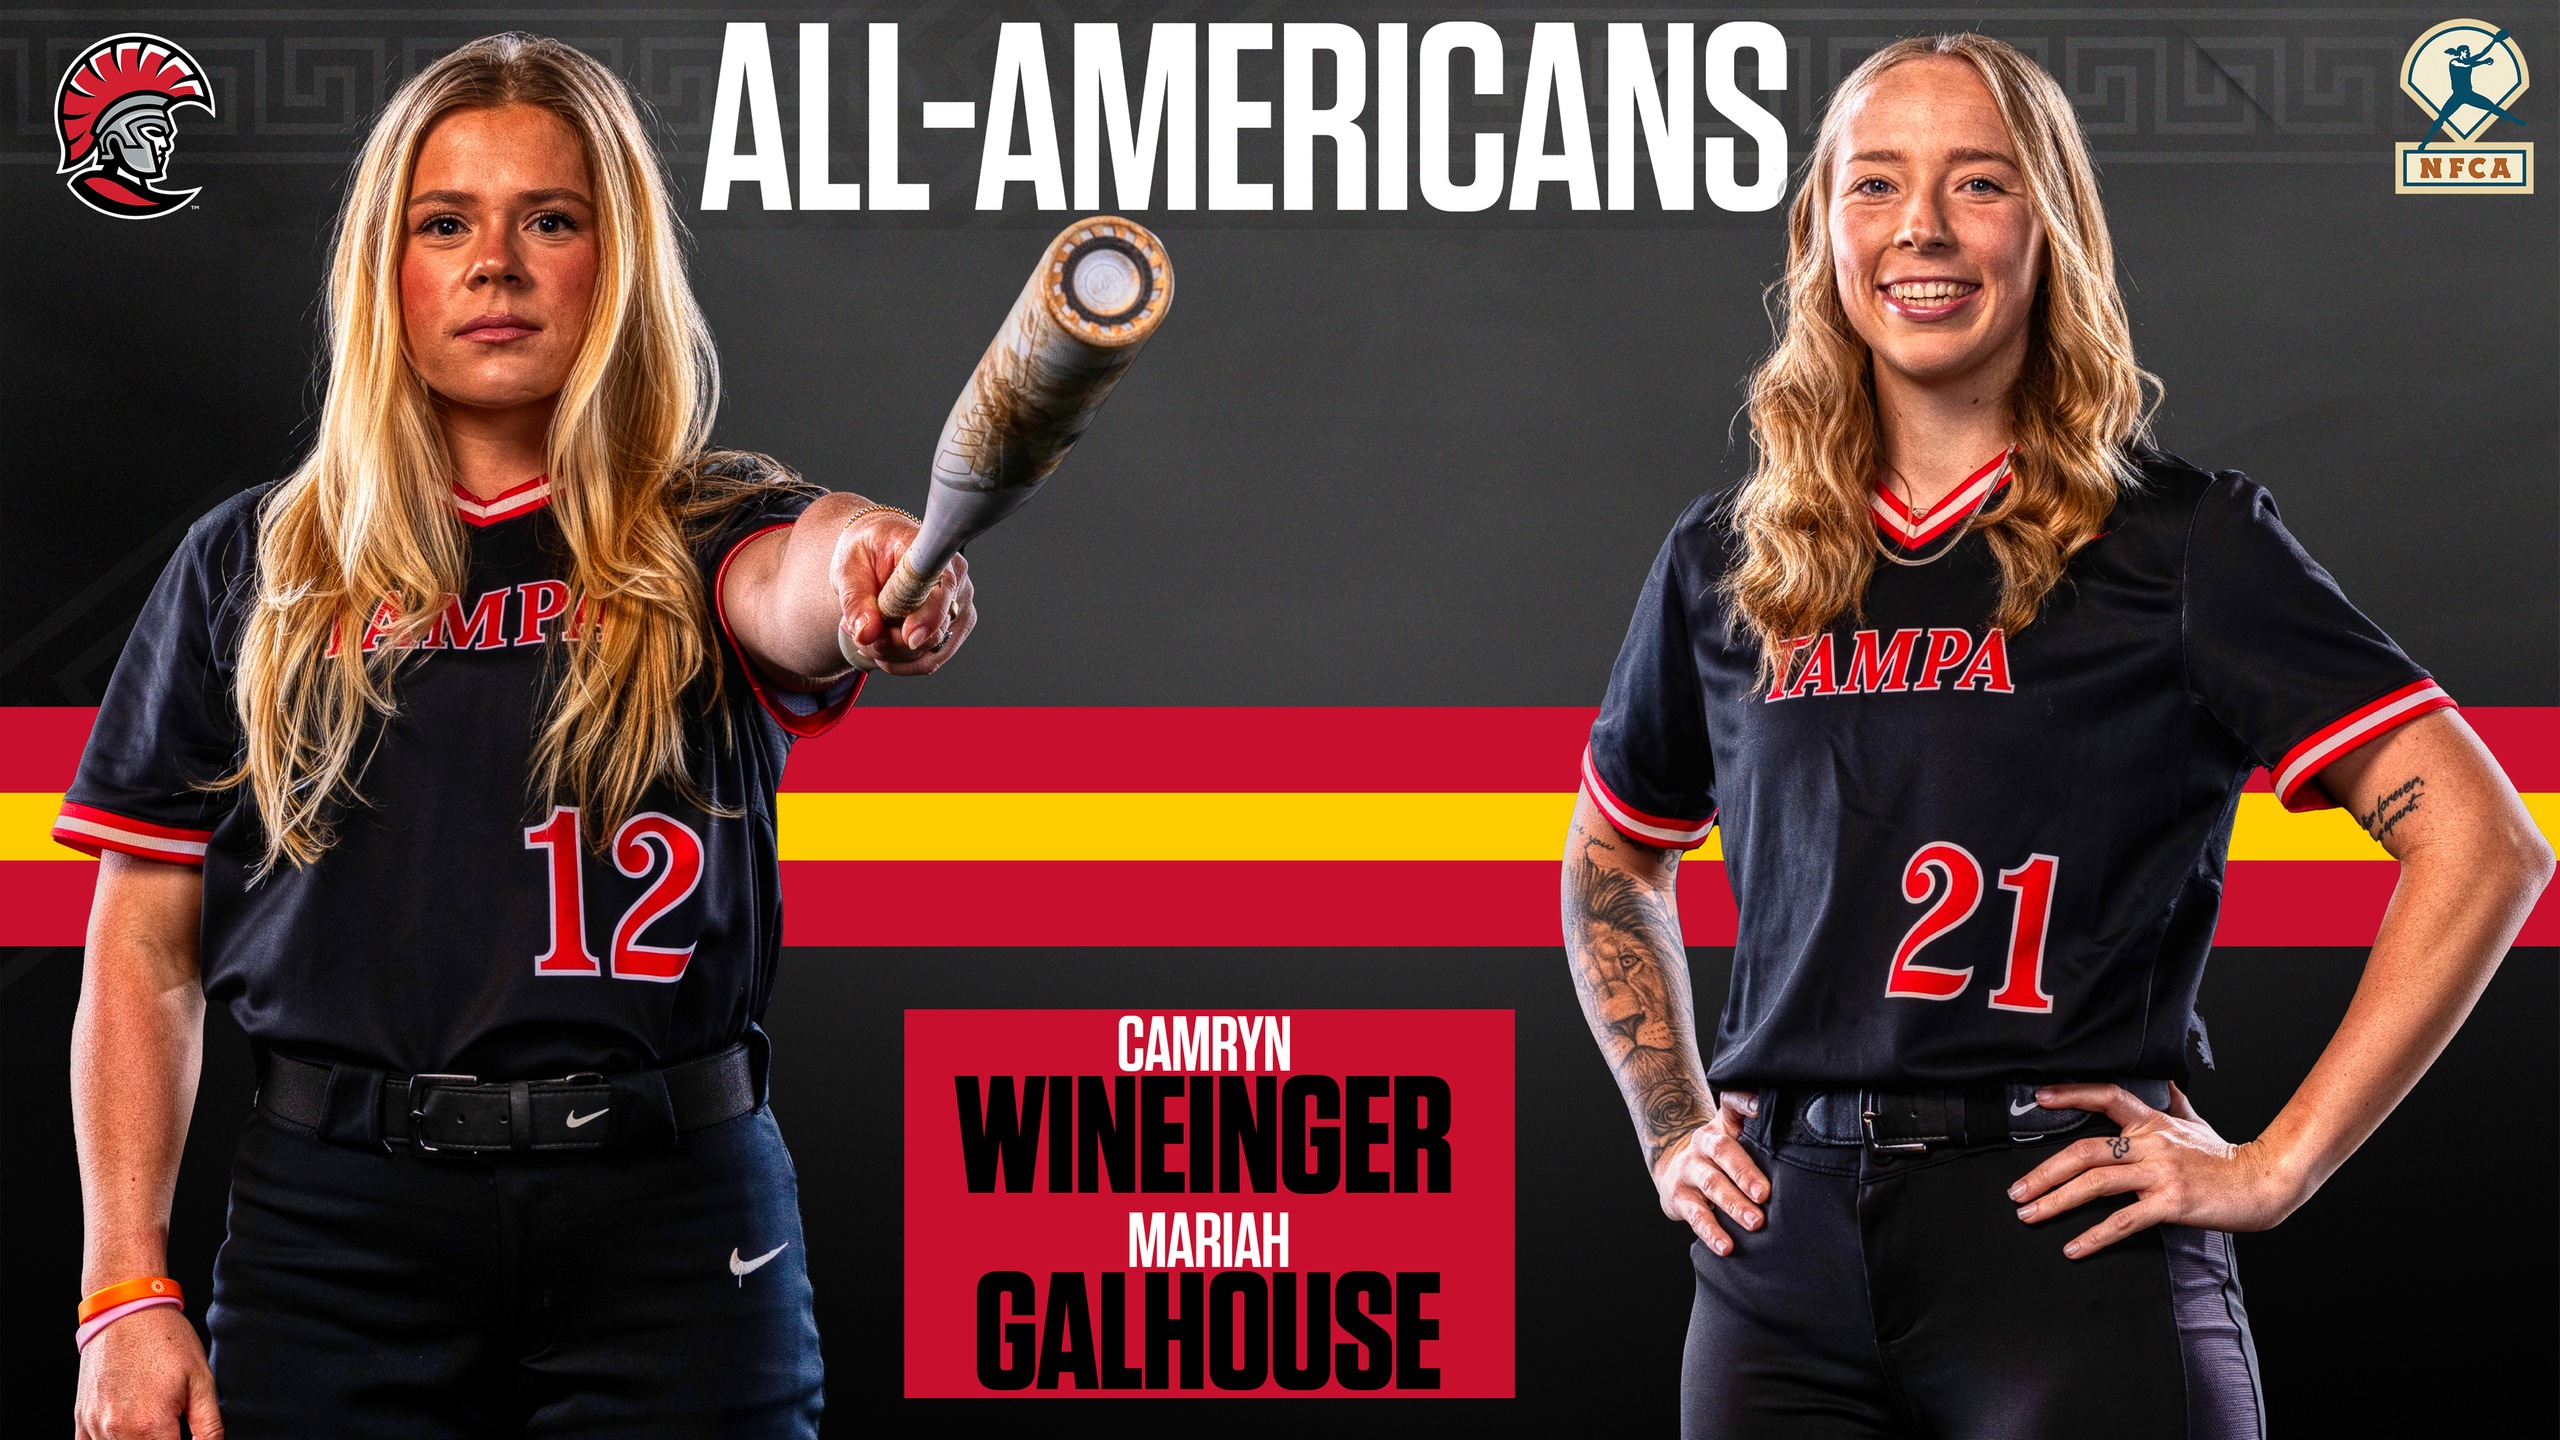 2023 NFCA All-Americans Mariah Galhouse, Camryn Wineinger